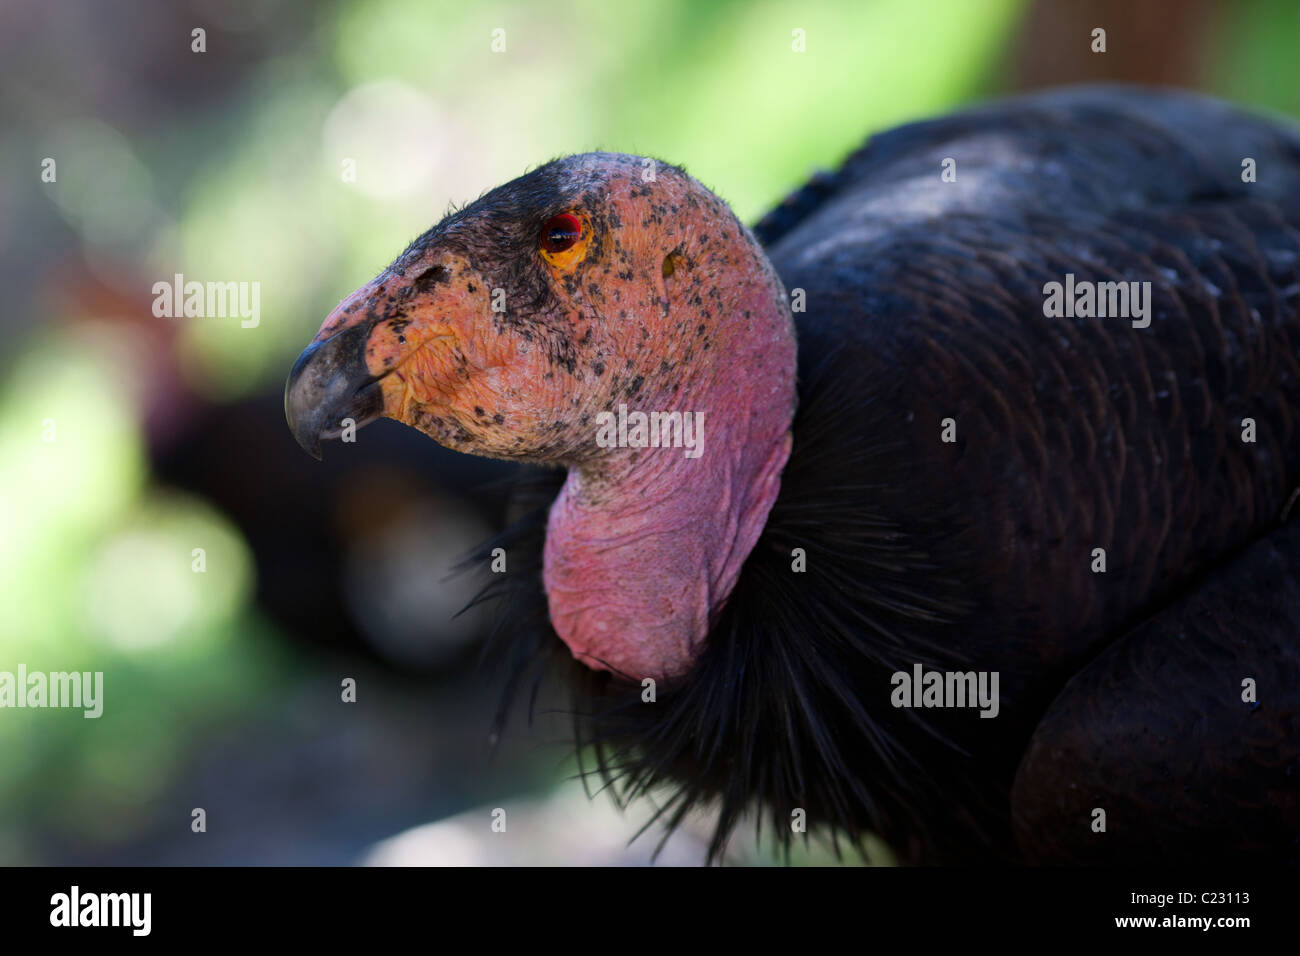 The endangered California condor. Only about 200 condors are left in the wild. This one was spotted near Big Sur, Monterey County, California, USA. Stock Photo